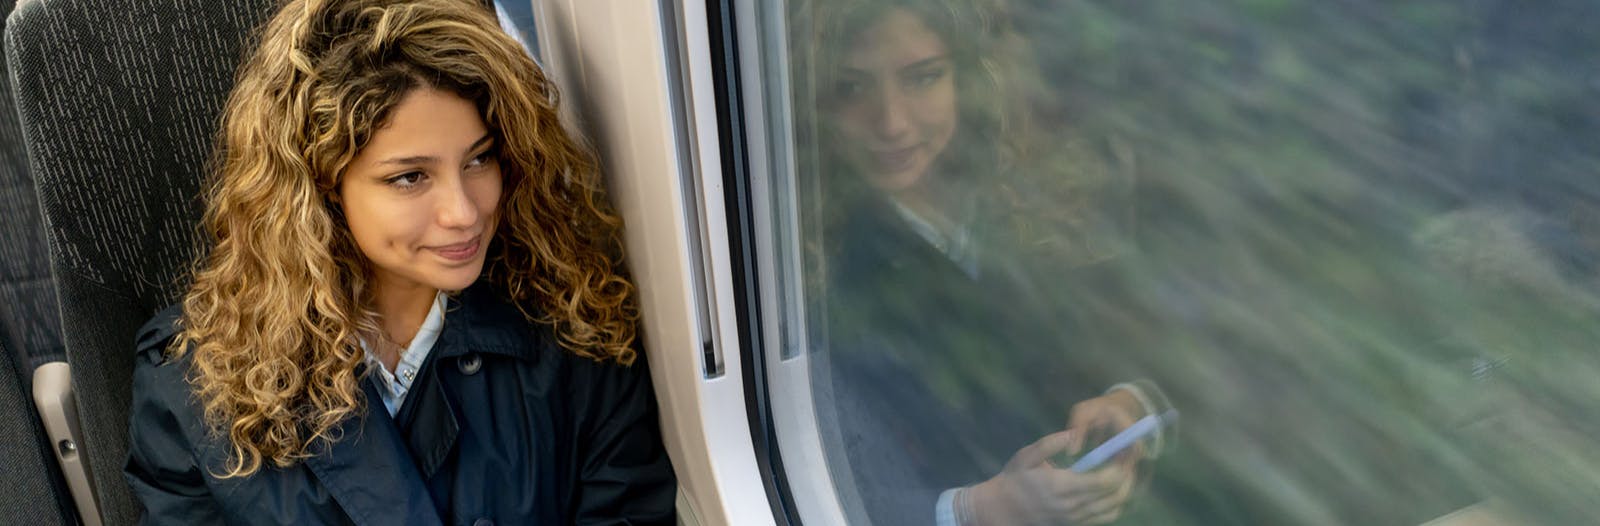 Woman looks out a train window